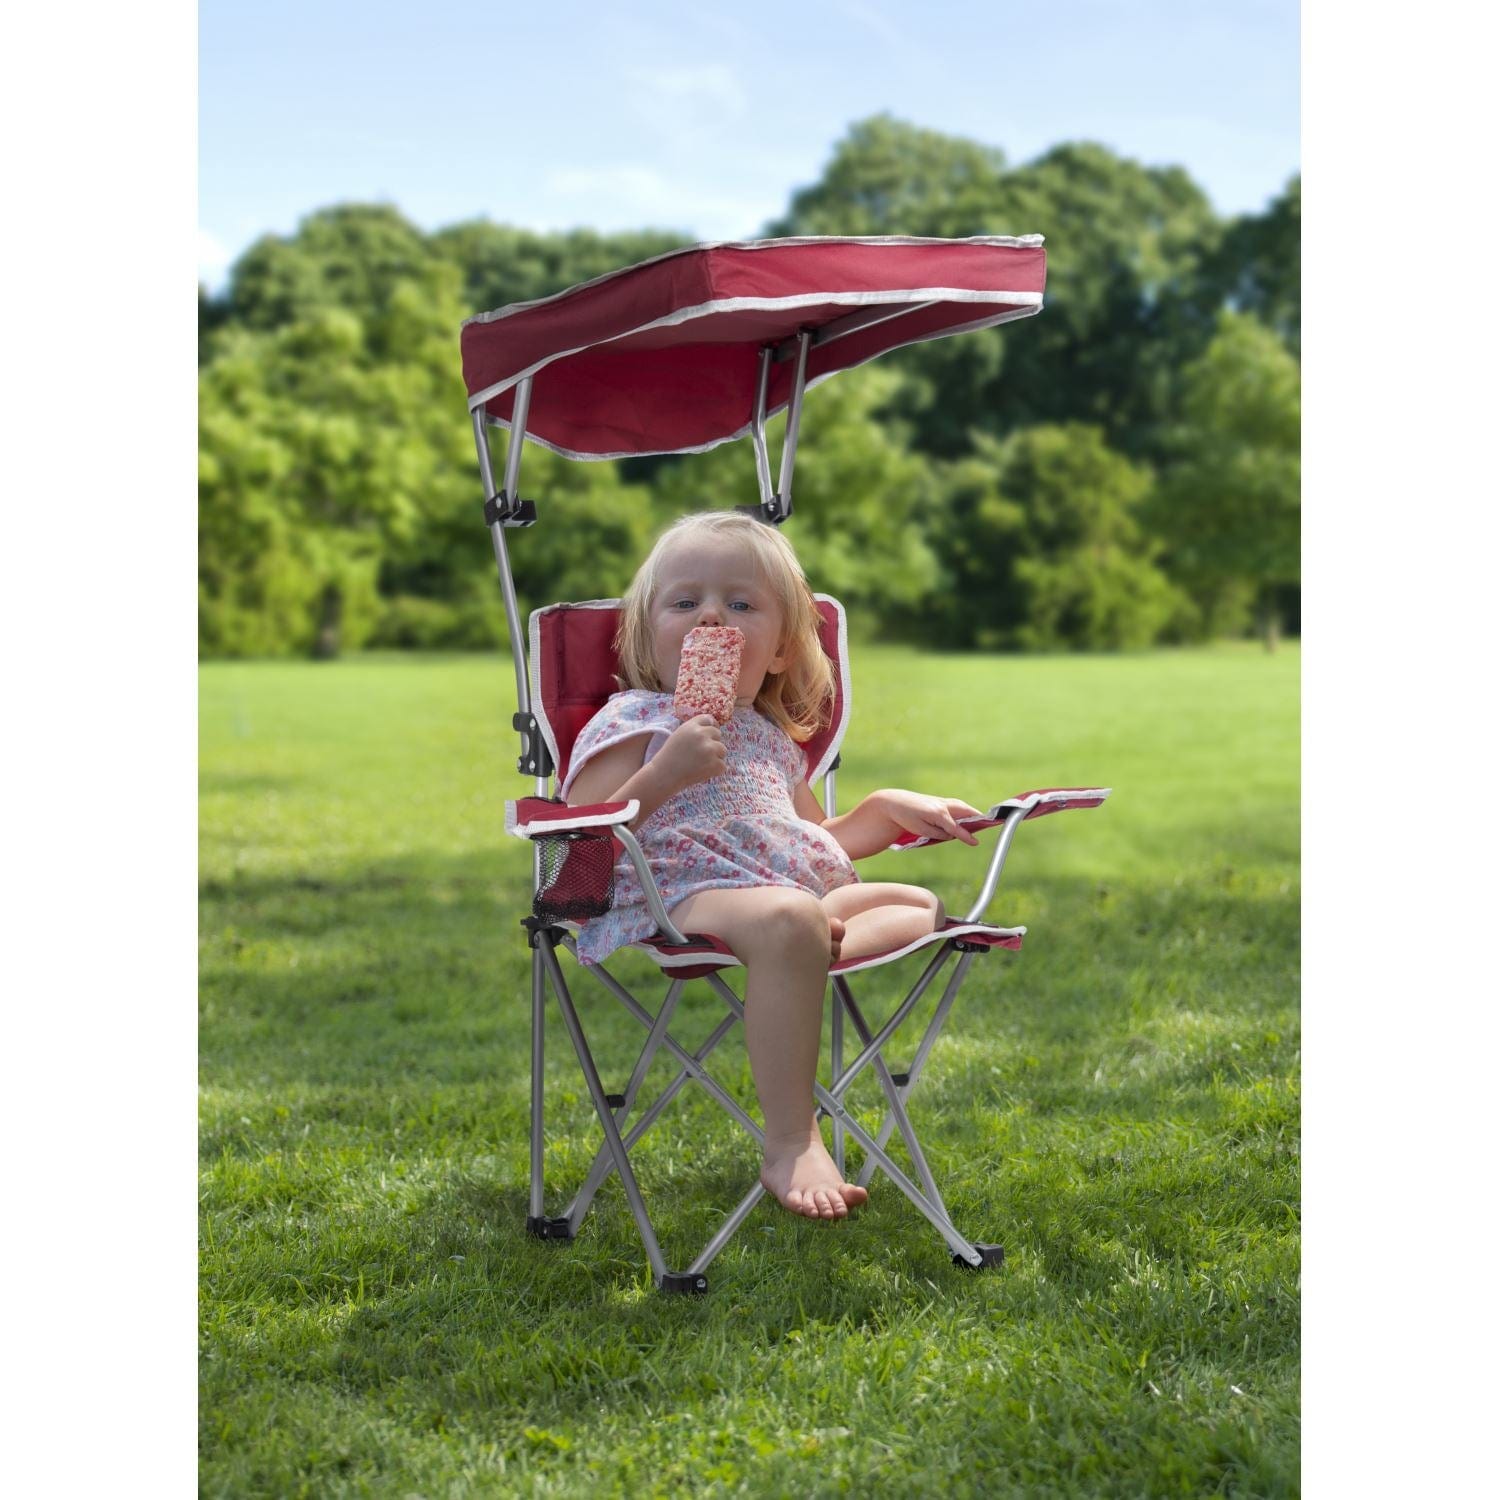 The Fulfiller Portable Chairs Quik Shade | Kids Shade Folding Chair - Red/Silver 167611DS